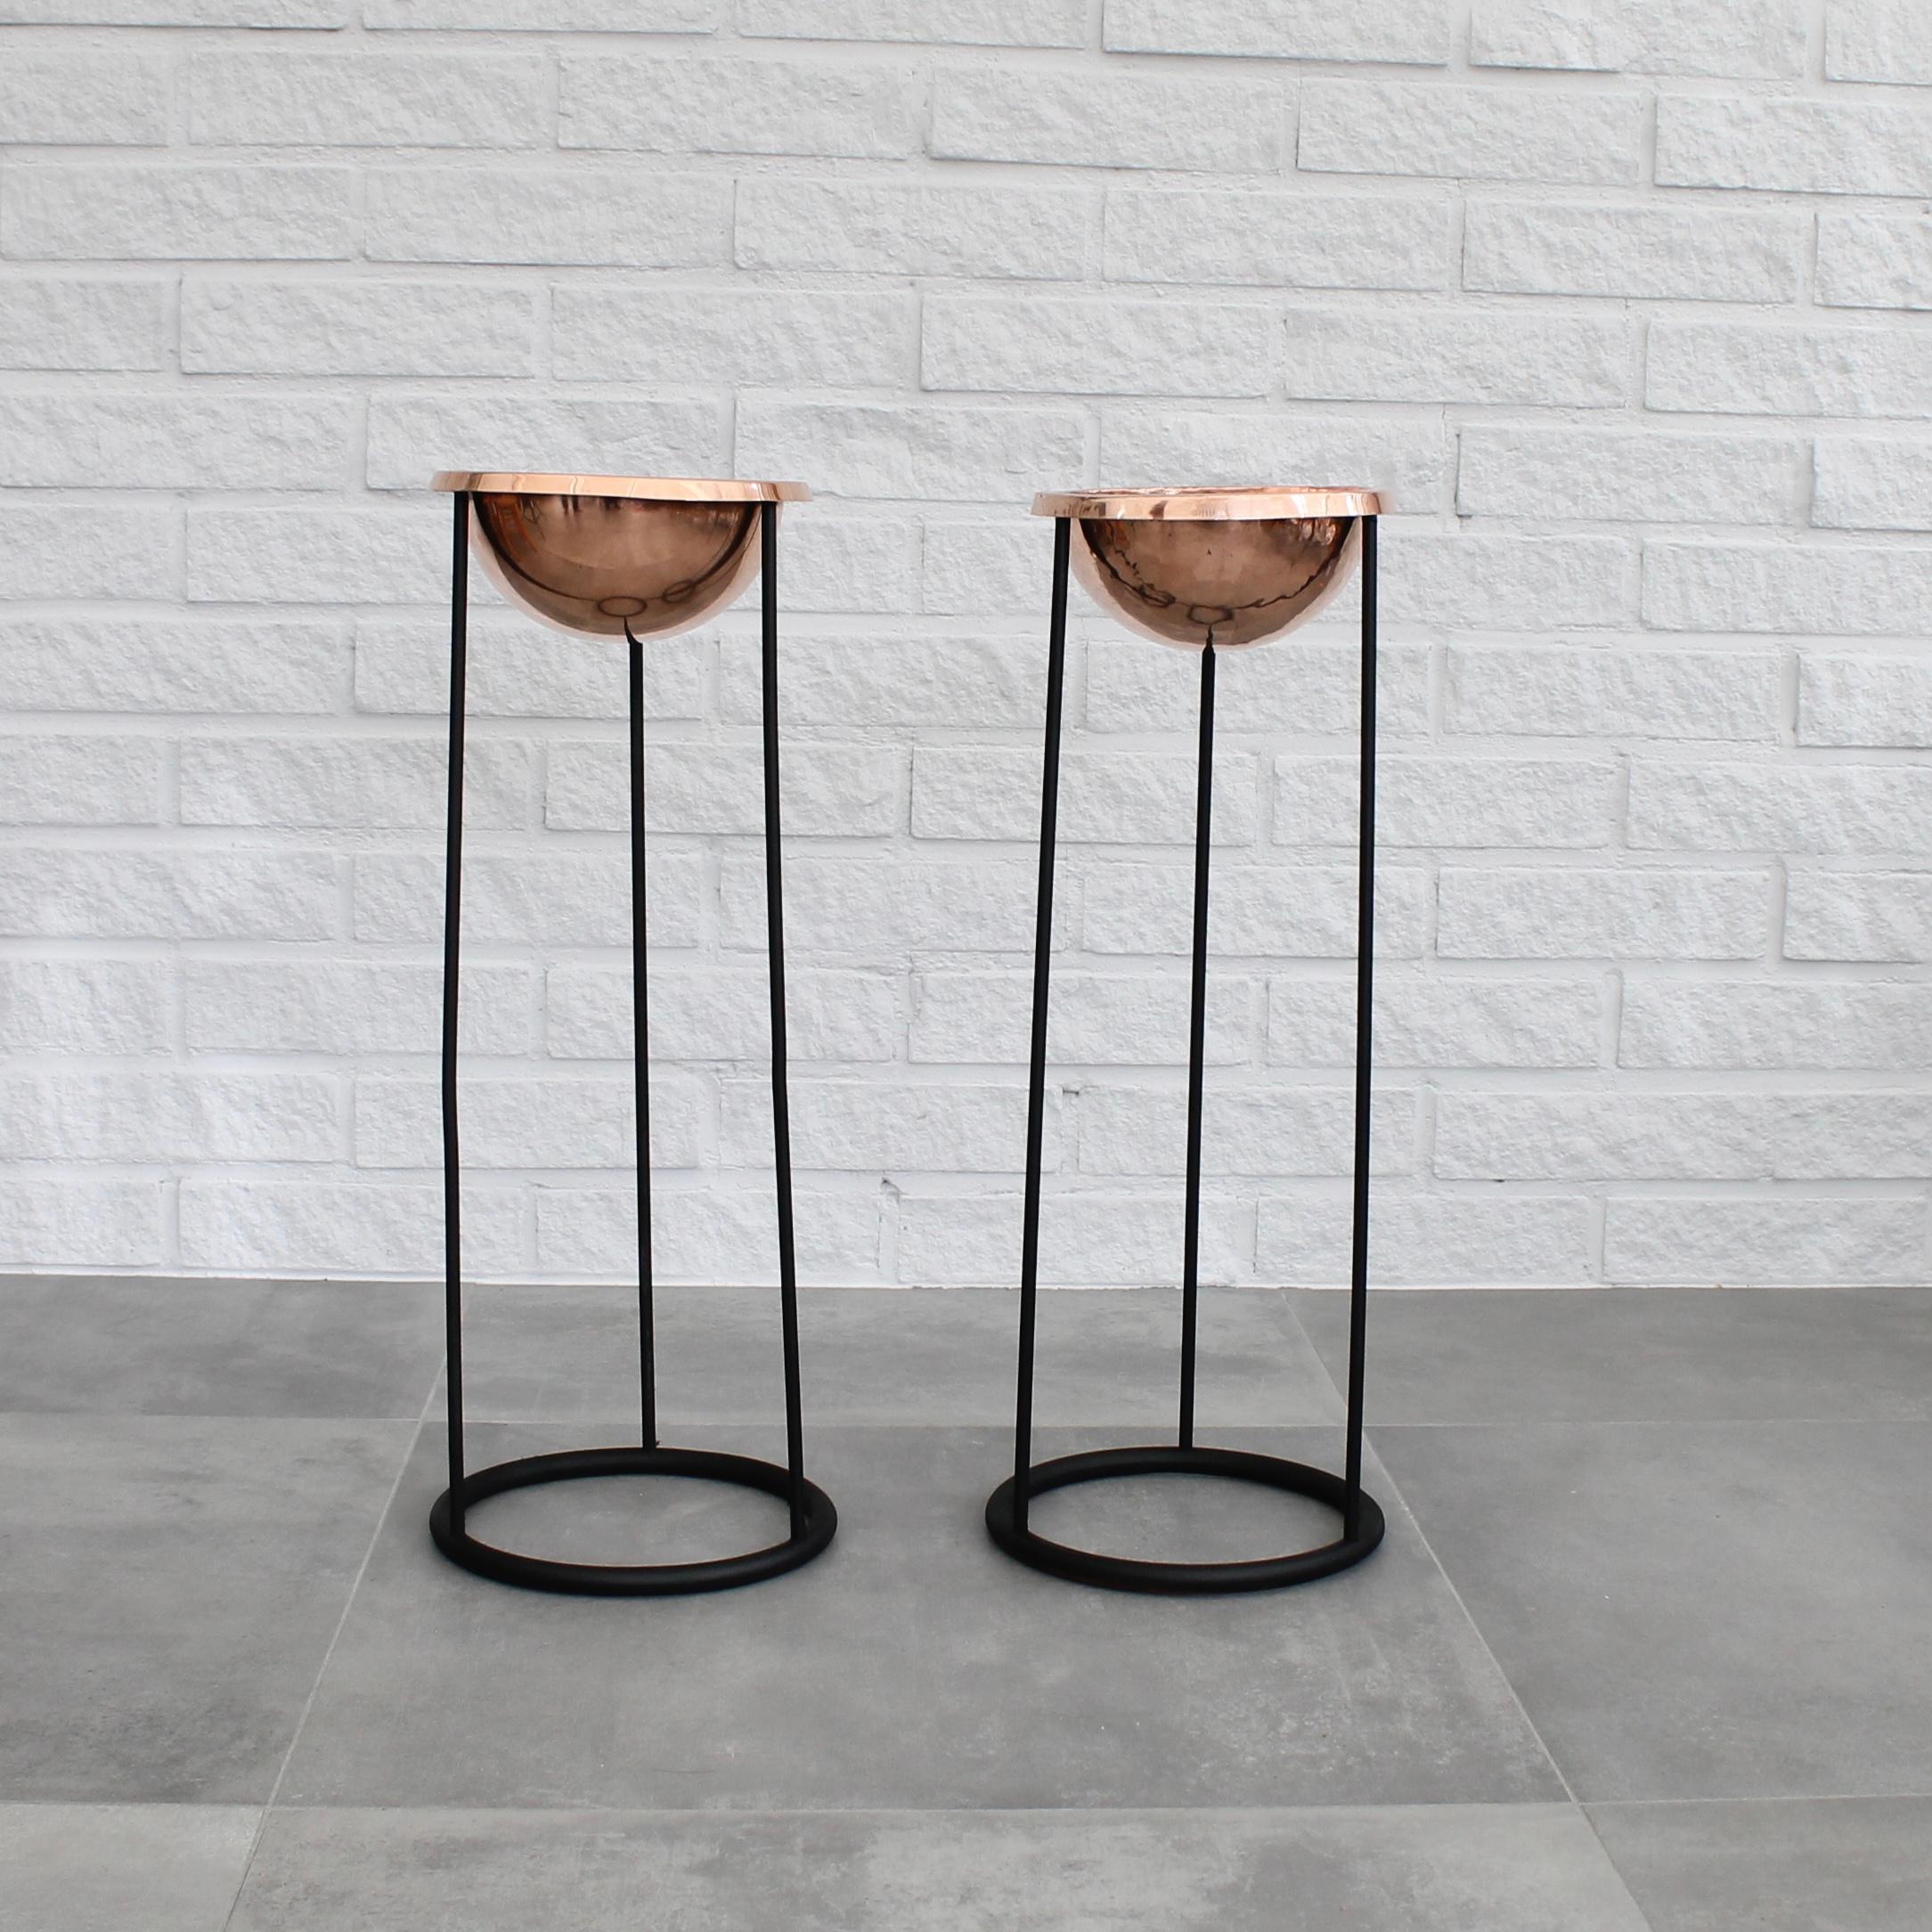 A pair of floor-standing ashtrays, model C34 by Hans-Agne Jakobsson AB in Markaryd, Sweden, dating back to the 1950s/60s. These feature a black metal frame with dome-shaped copper ashtrays. Can also be used as planters or bowls. Swedish industrial